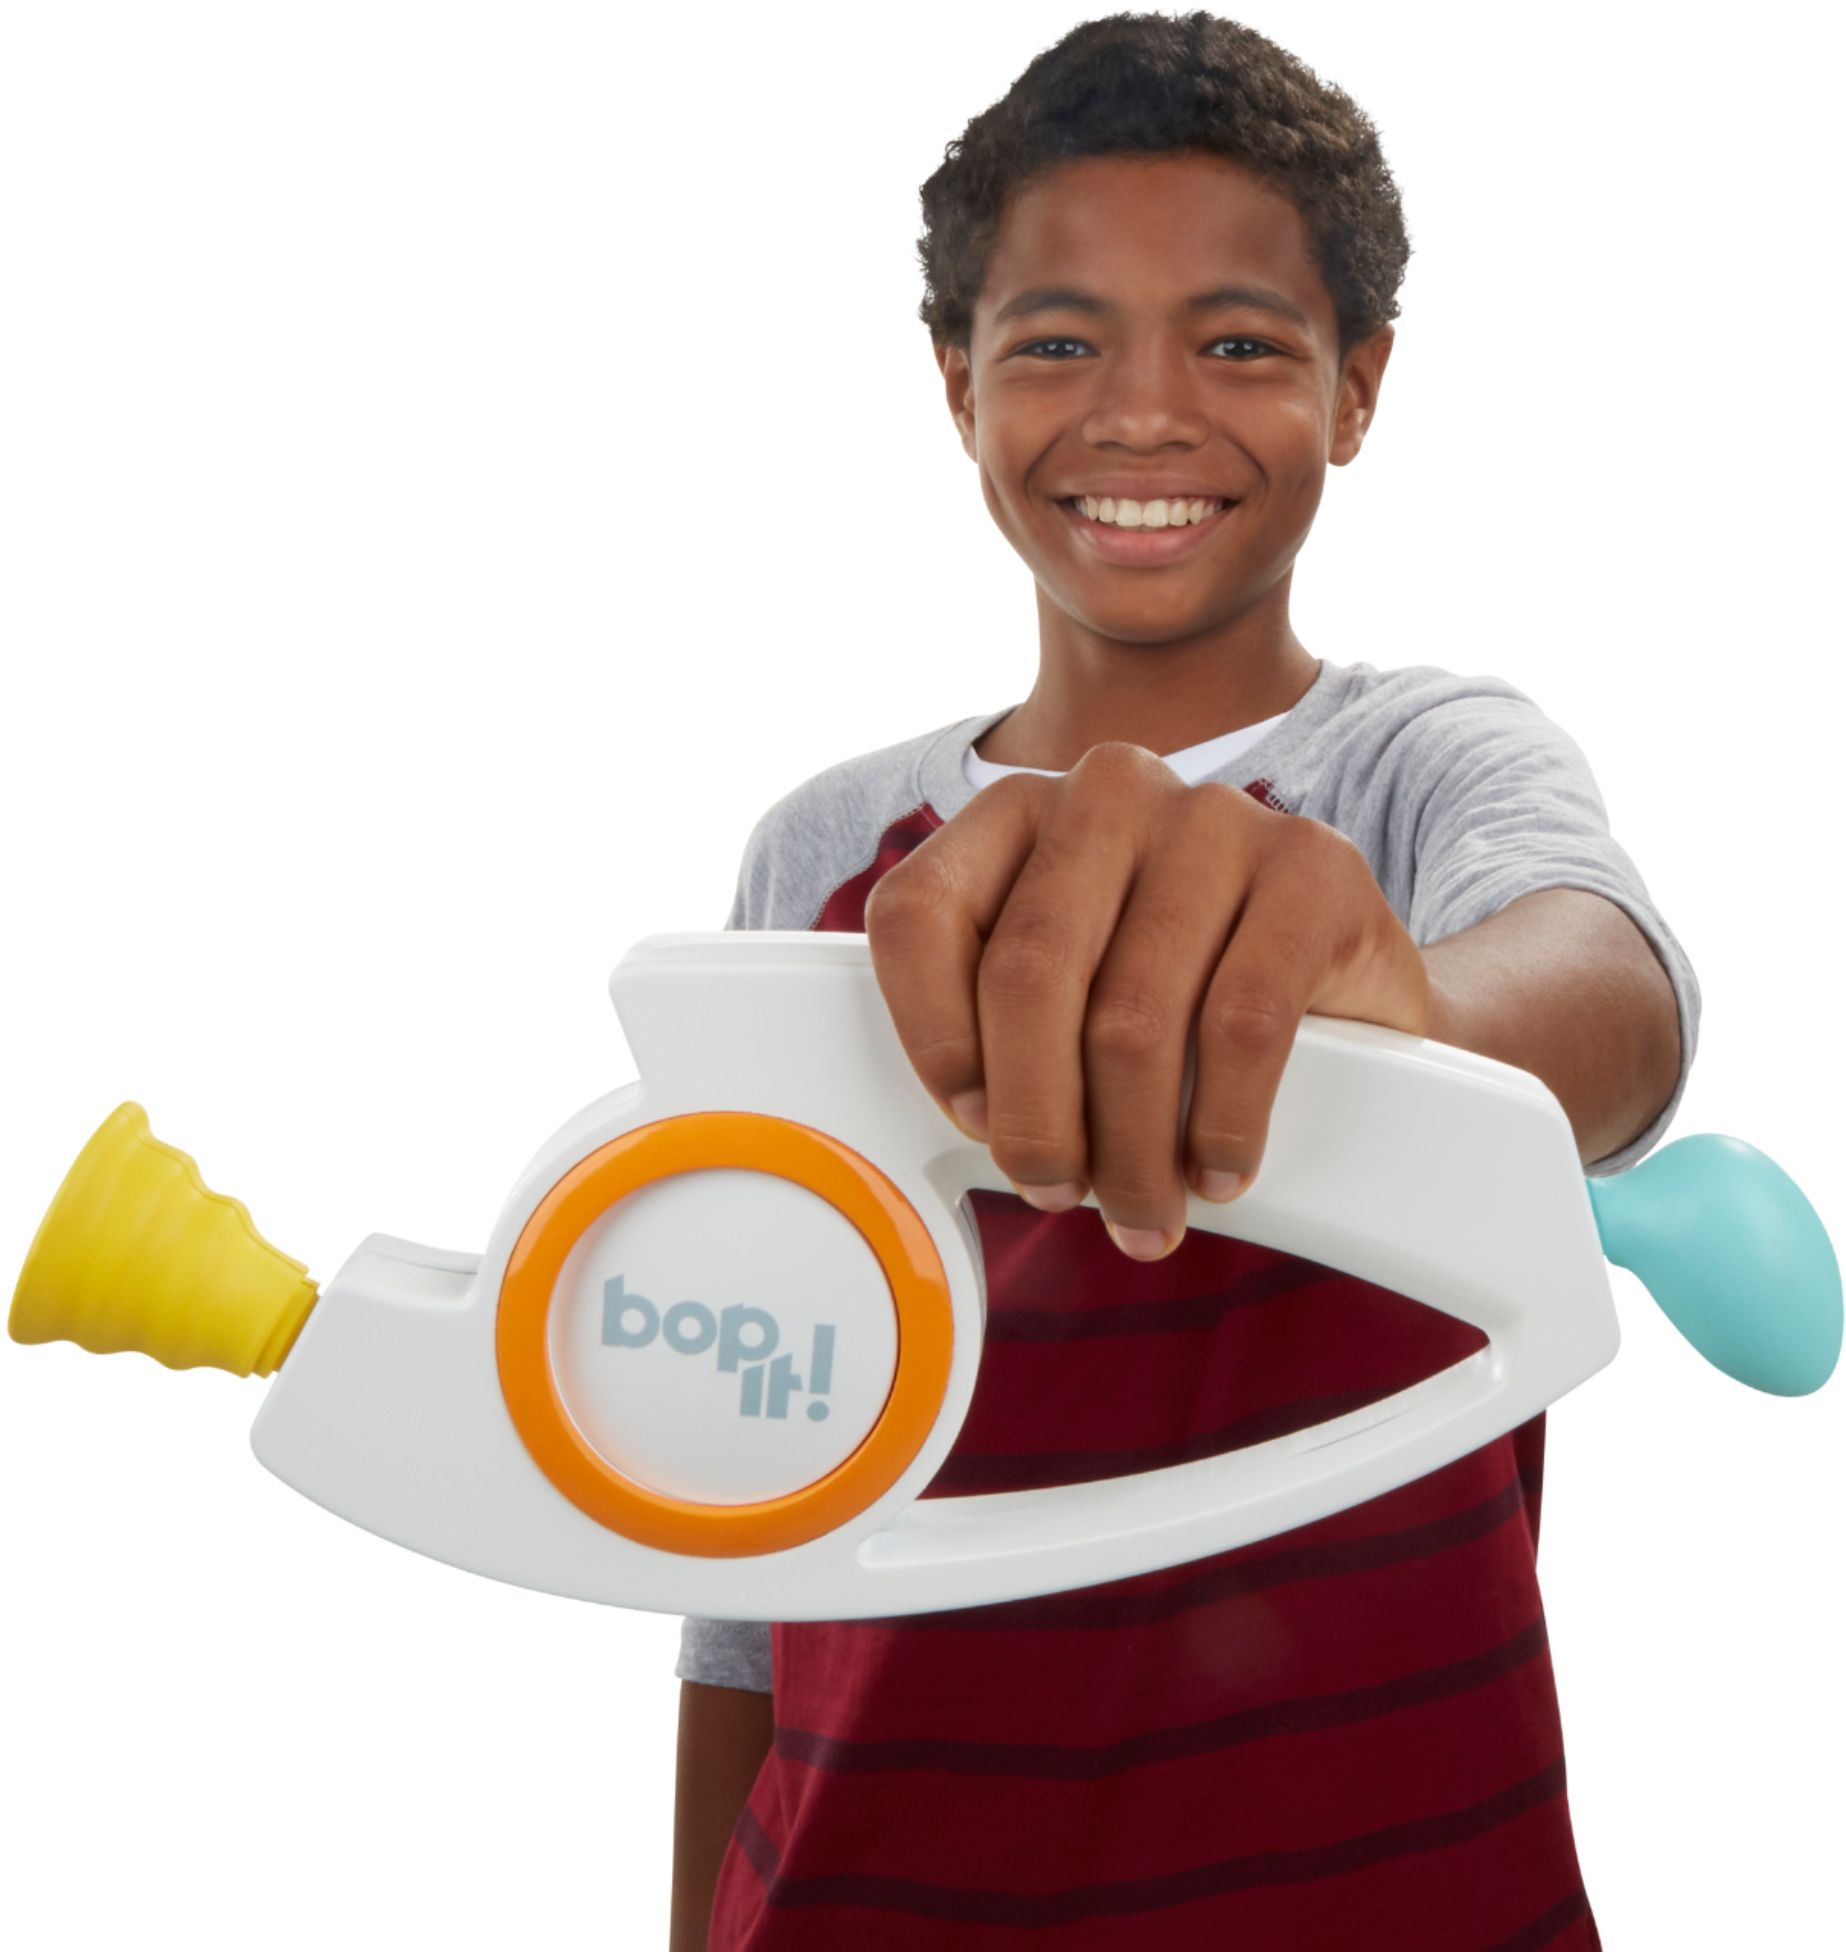 Electronic Game E6393 for sale online Hasbro Gaming Bop It 